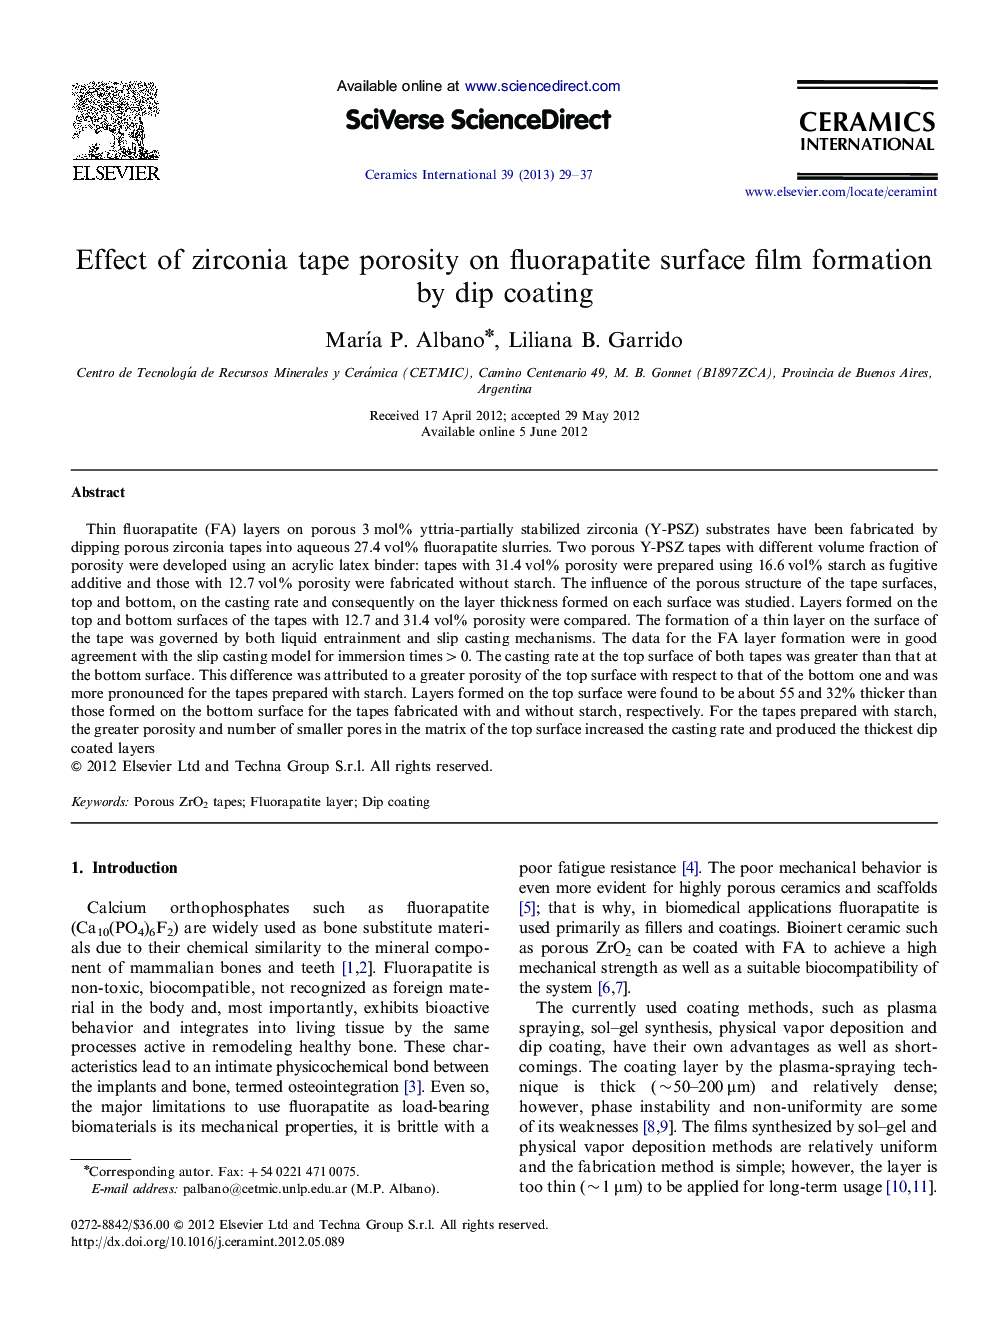 Effect of zirconia tape porosity on fluorapatite surface film formation by dip coating